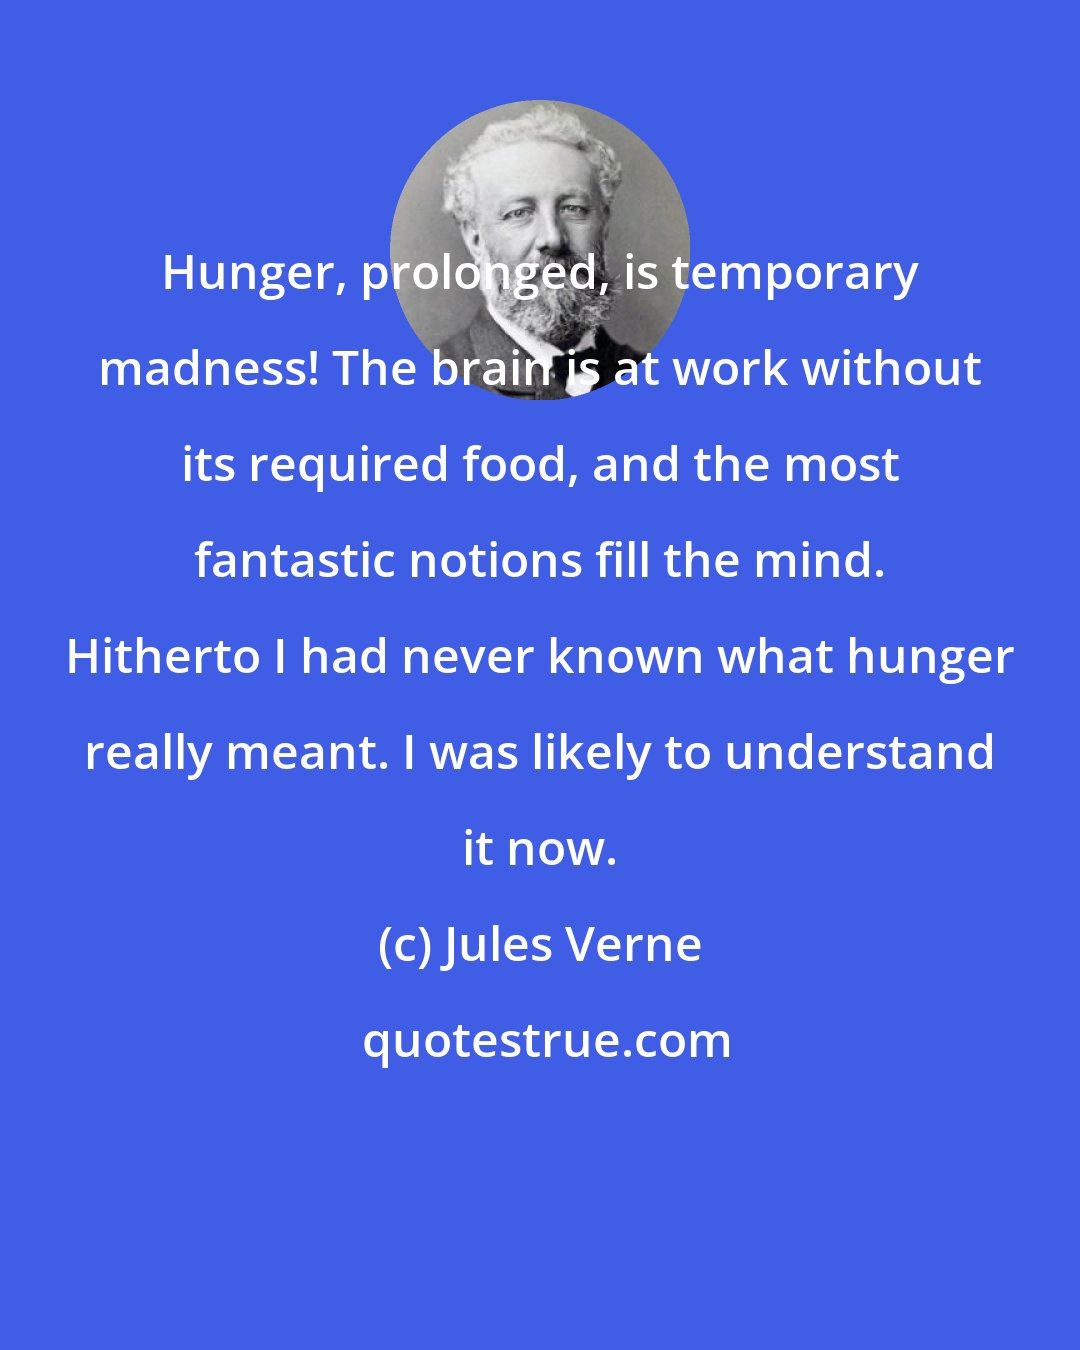 Jules Verne: Hunger, prolonged, is temporary madness! The brain is at work without its required food, and the most fantastic notions fill the mind. Hitherto I had never known what hunger really meant. I was likely to understand it now.